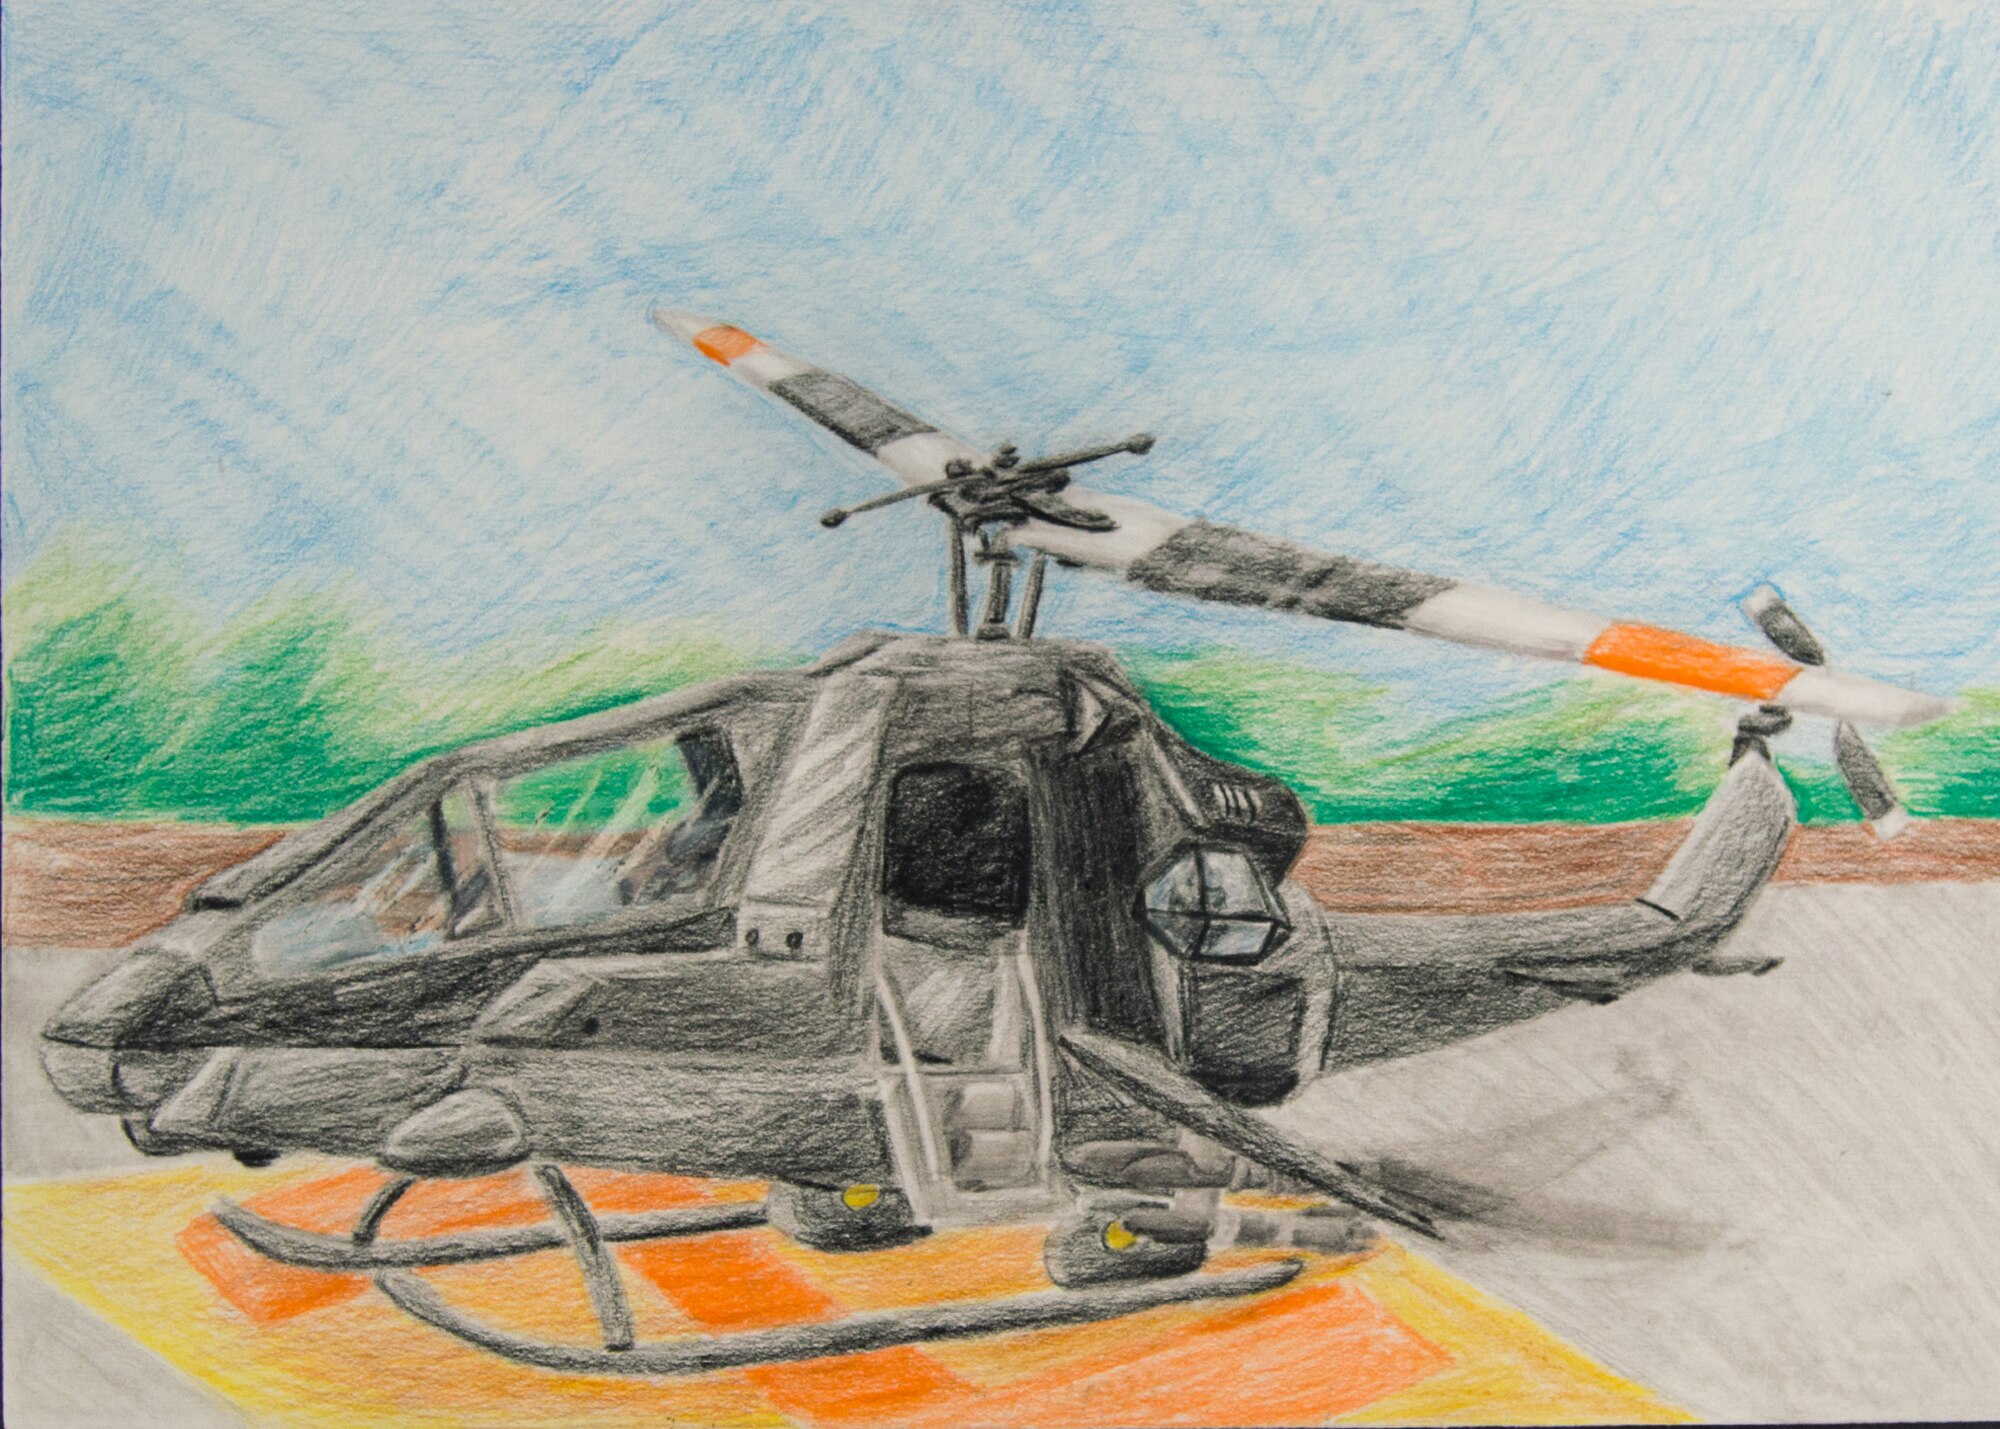 More than 130 pieces of art created by local students from schools across the Miami Valley will be on display at the National Museum of the U.S Air Force during the 33rd Annual Student Aviation Art Competition and Exhibition. The exhibit will be open from April 2-May 1, 2016. (U.S. Air Force photo)